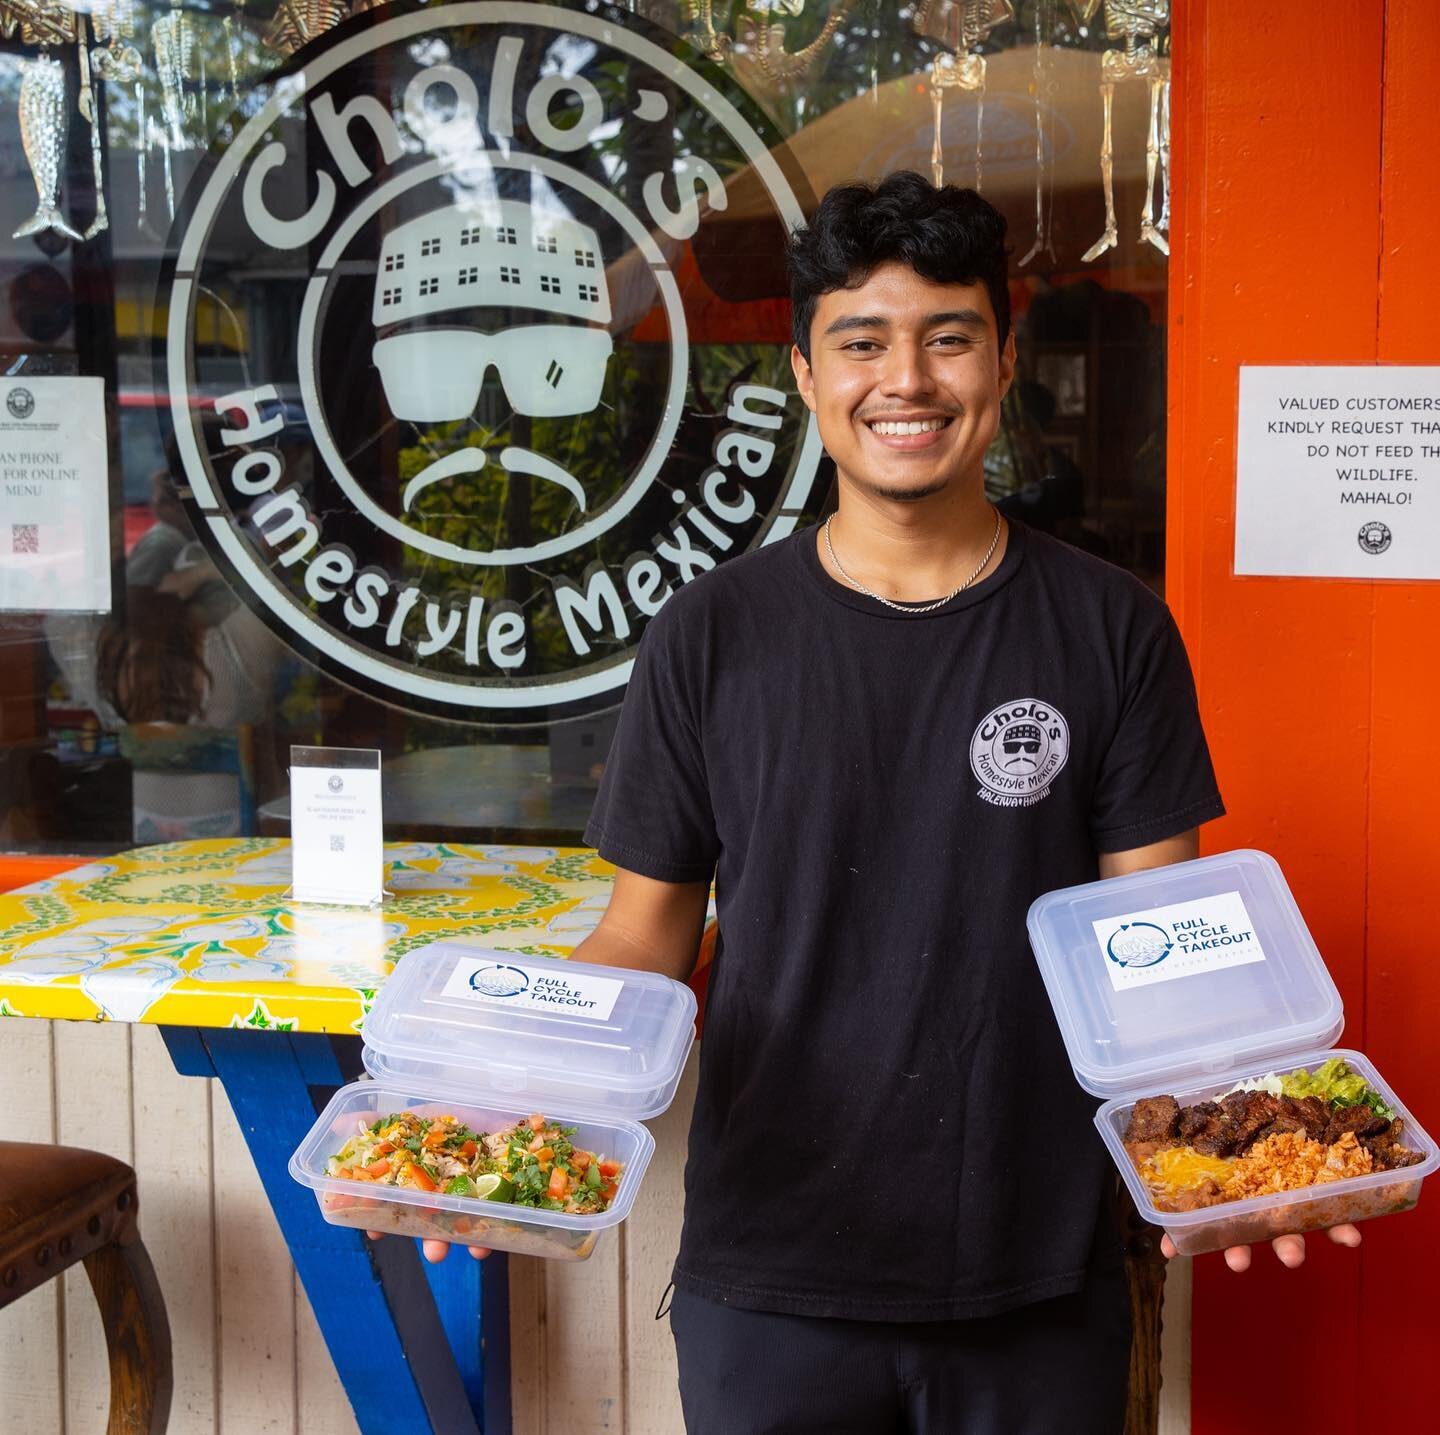 Our next restaurant partner spotlight is @choloshaleiwa ! 

Whats better than delicious  takeout? We&rsquo;d say it&rsquo;s takeout in reusable takeout container 🤙🏾

With this partnership, you will be able to order takeout meals from this long-time